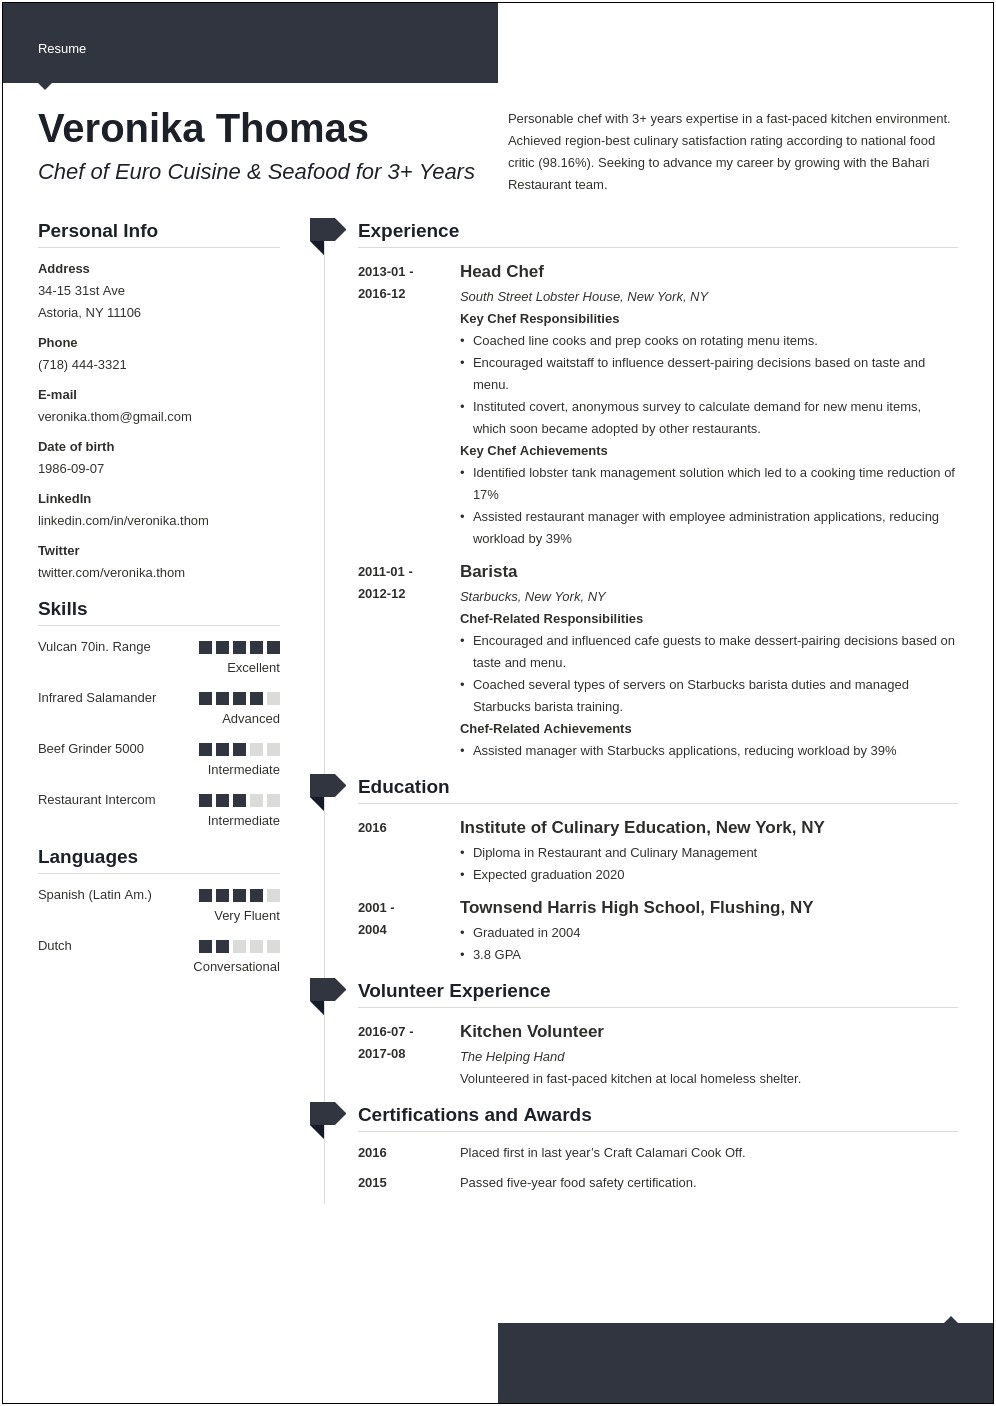 Resume Example Of A Chef